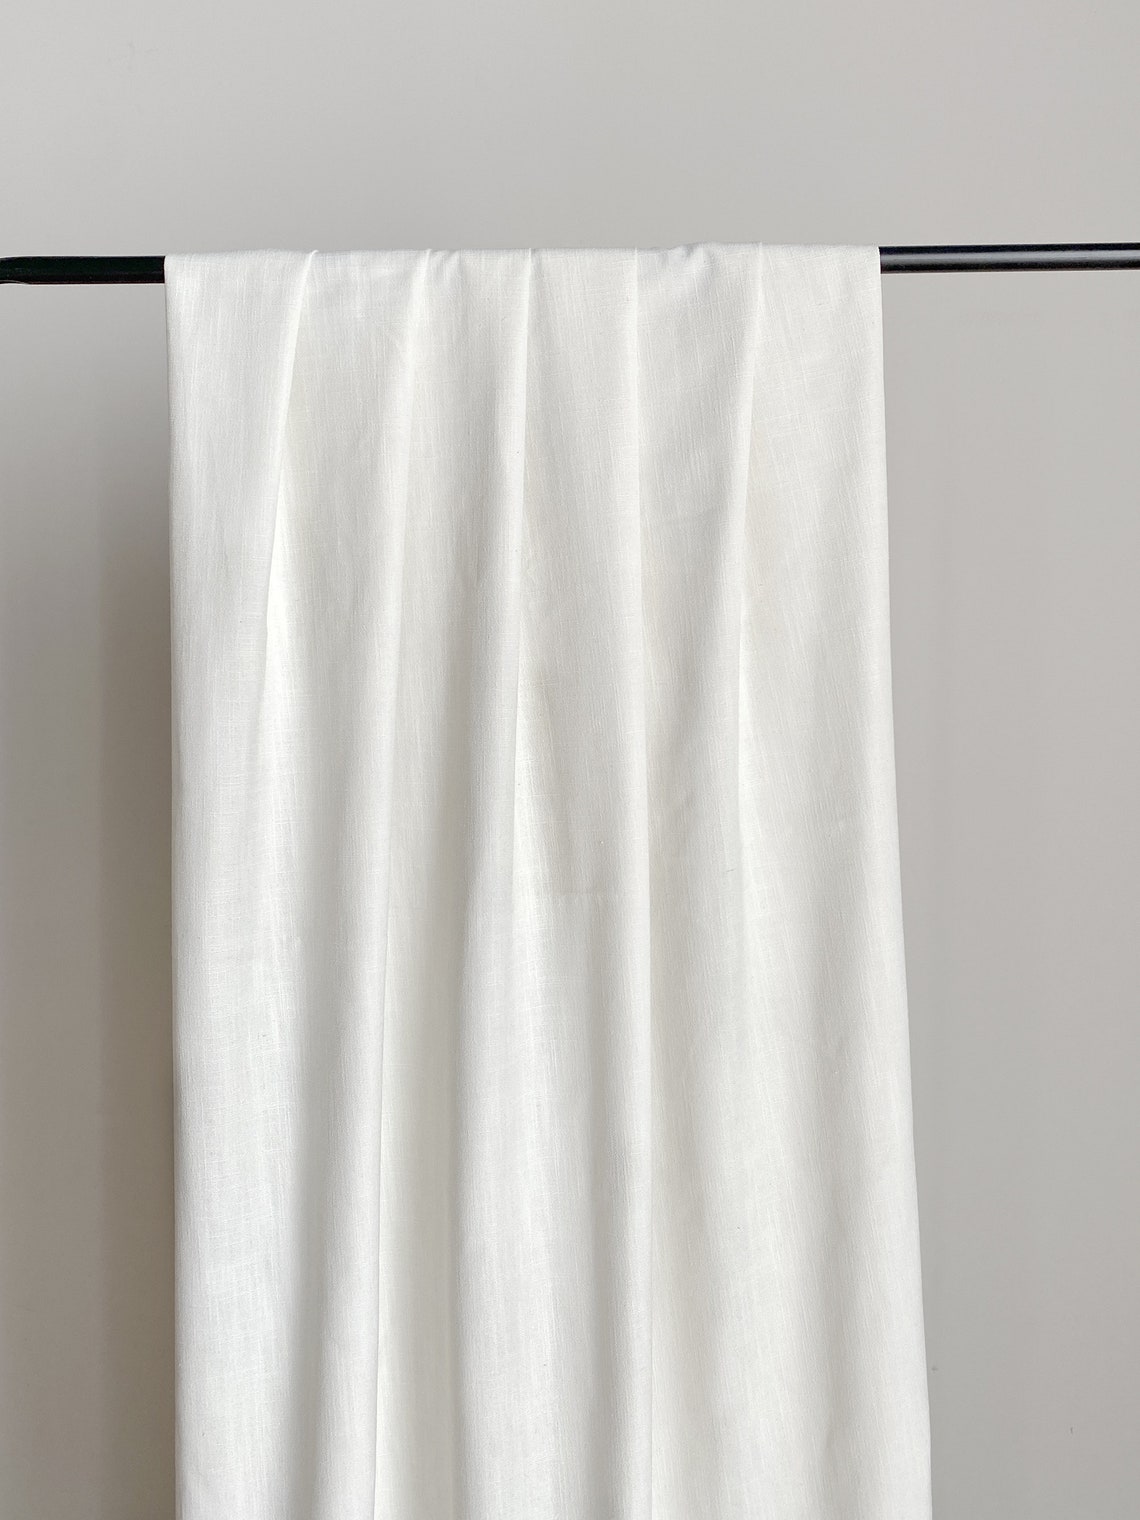 White Cotton Linen Curtain Panels With Tassels Beautiful - Etsy